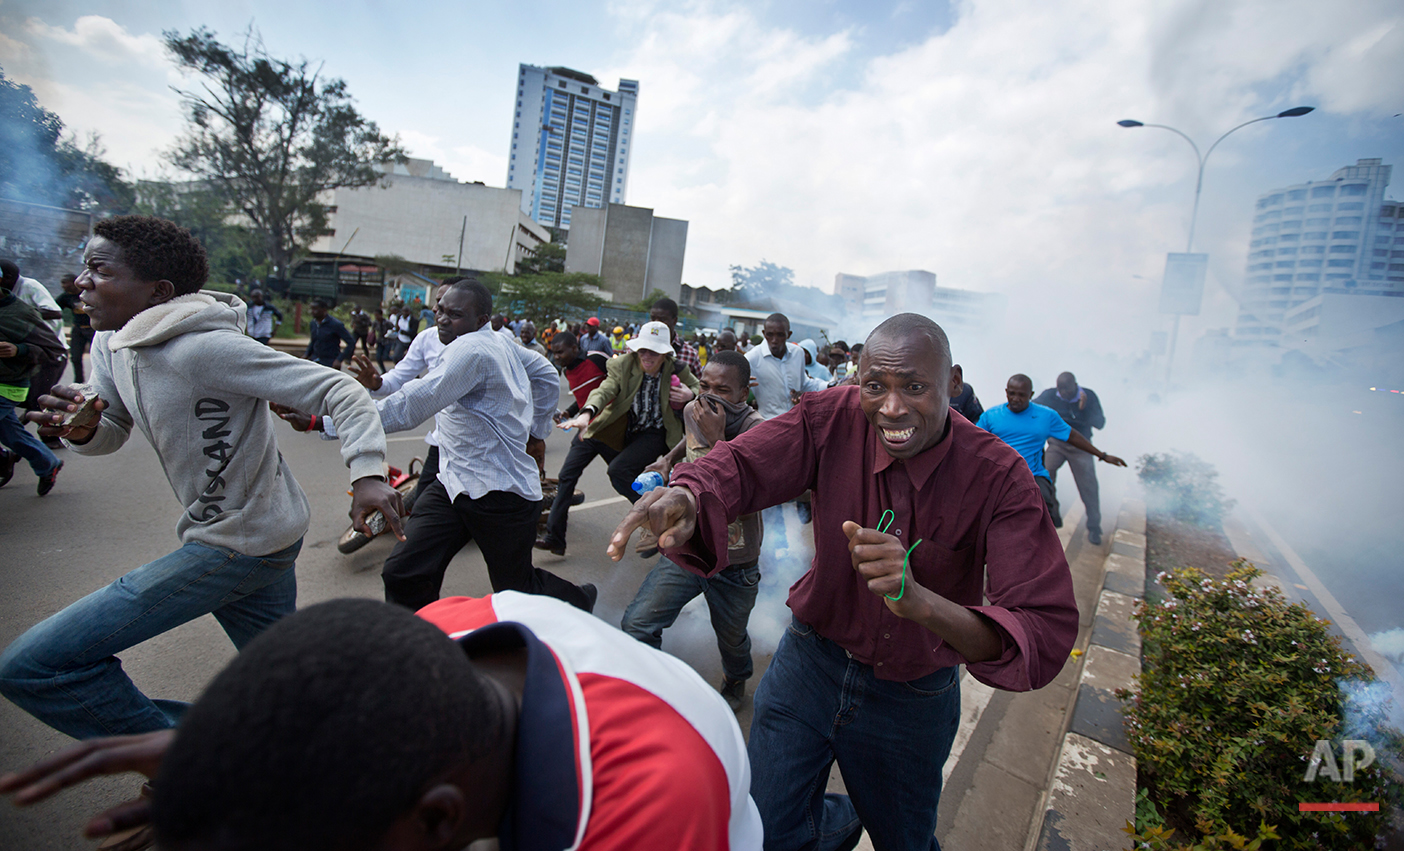  Opposition supporters, some carrying rocks, flee from clouds of tear gas fired by riot police, during a protest in downtown Nairobi, Kenya Monday, May 16, 2016. Kenyan police have tear-gassed and beaten opposition supporters during a protest demandi